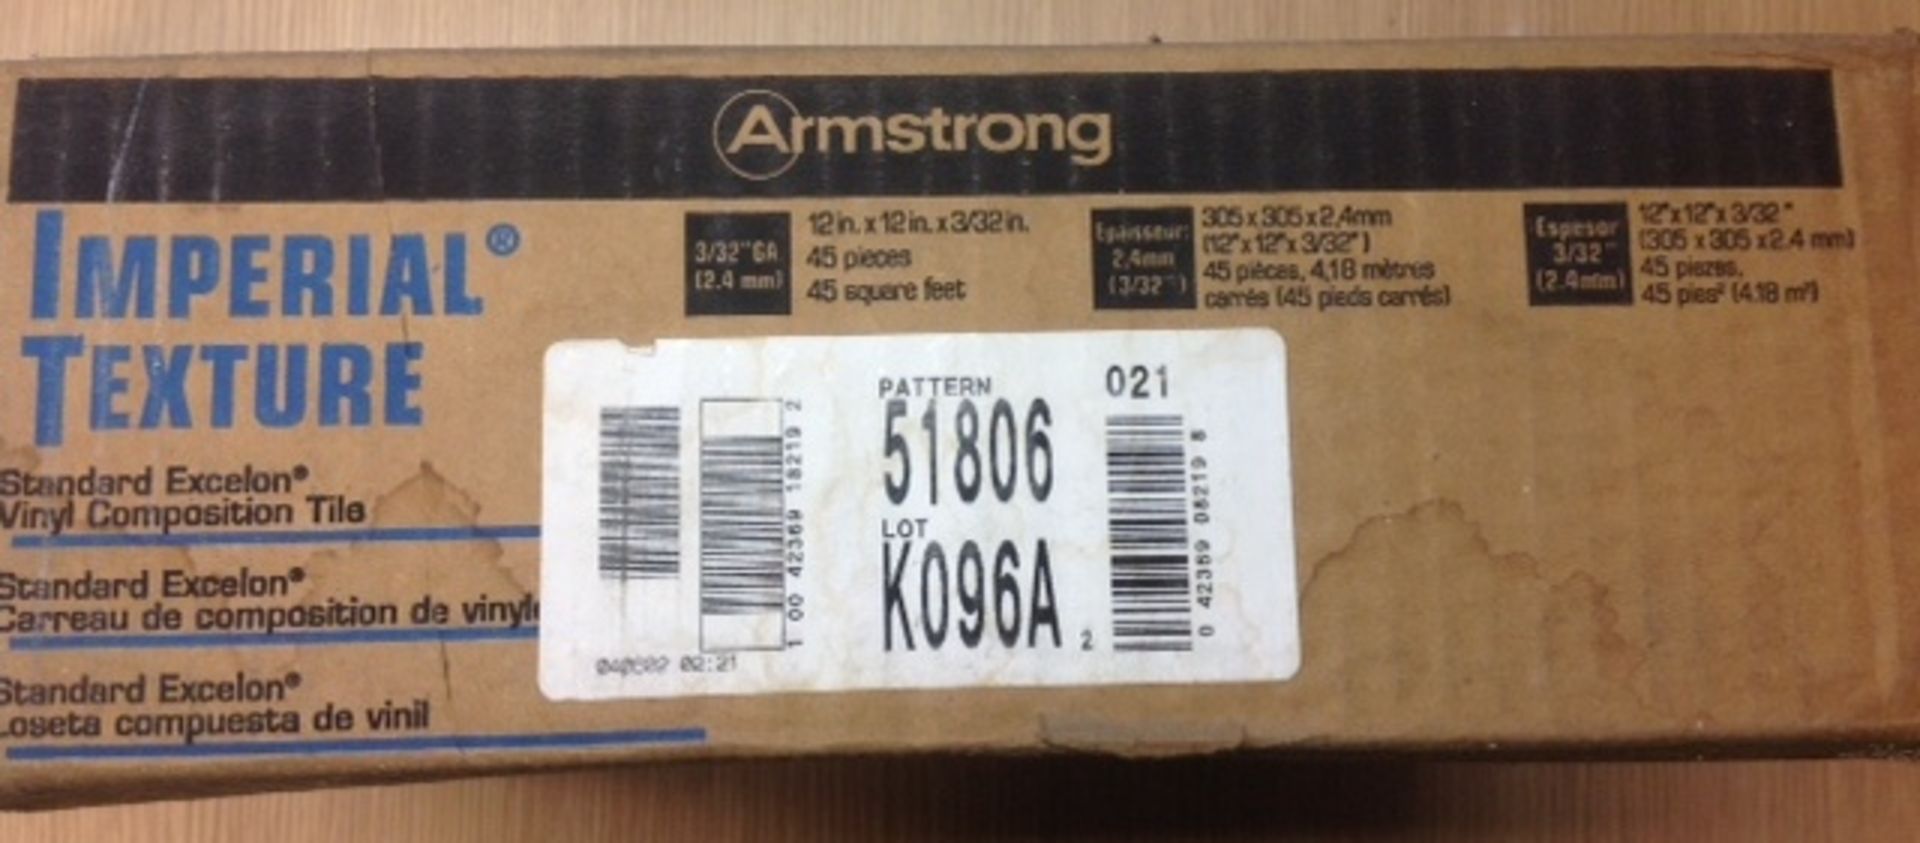 10 x Boxes of Armstrong vinyl floor tiles - 45 tiles per box = 45 sq ft - Image 3 of 4